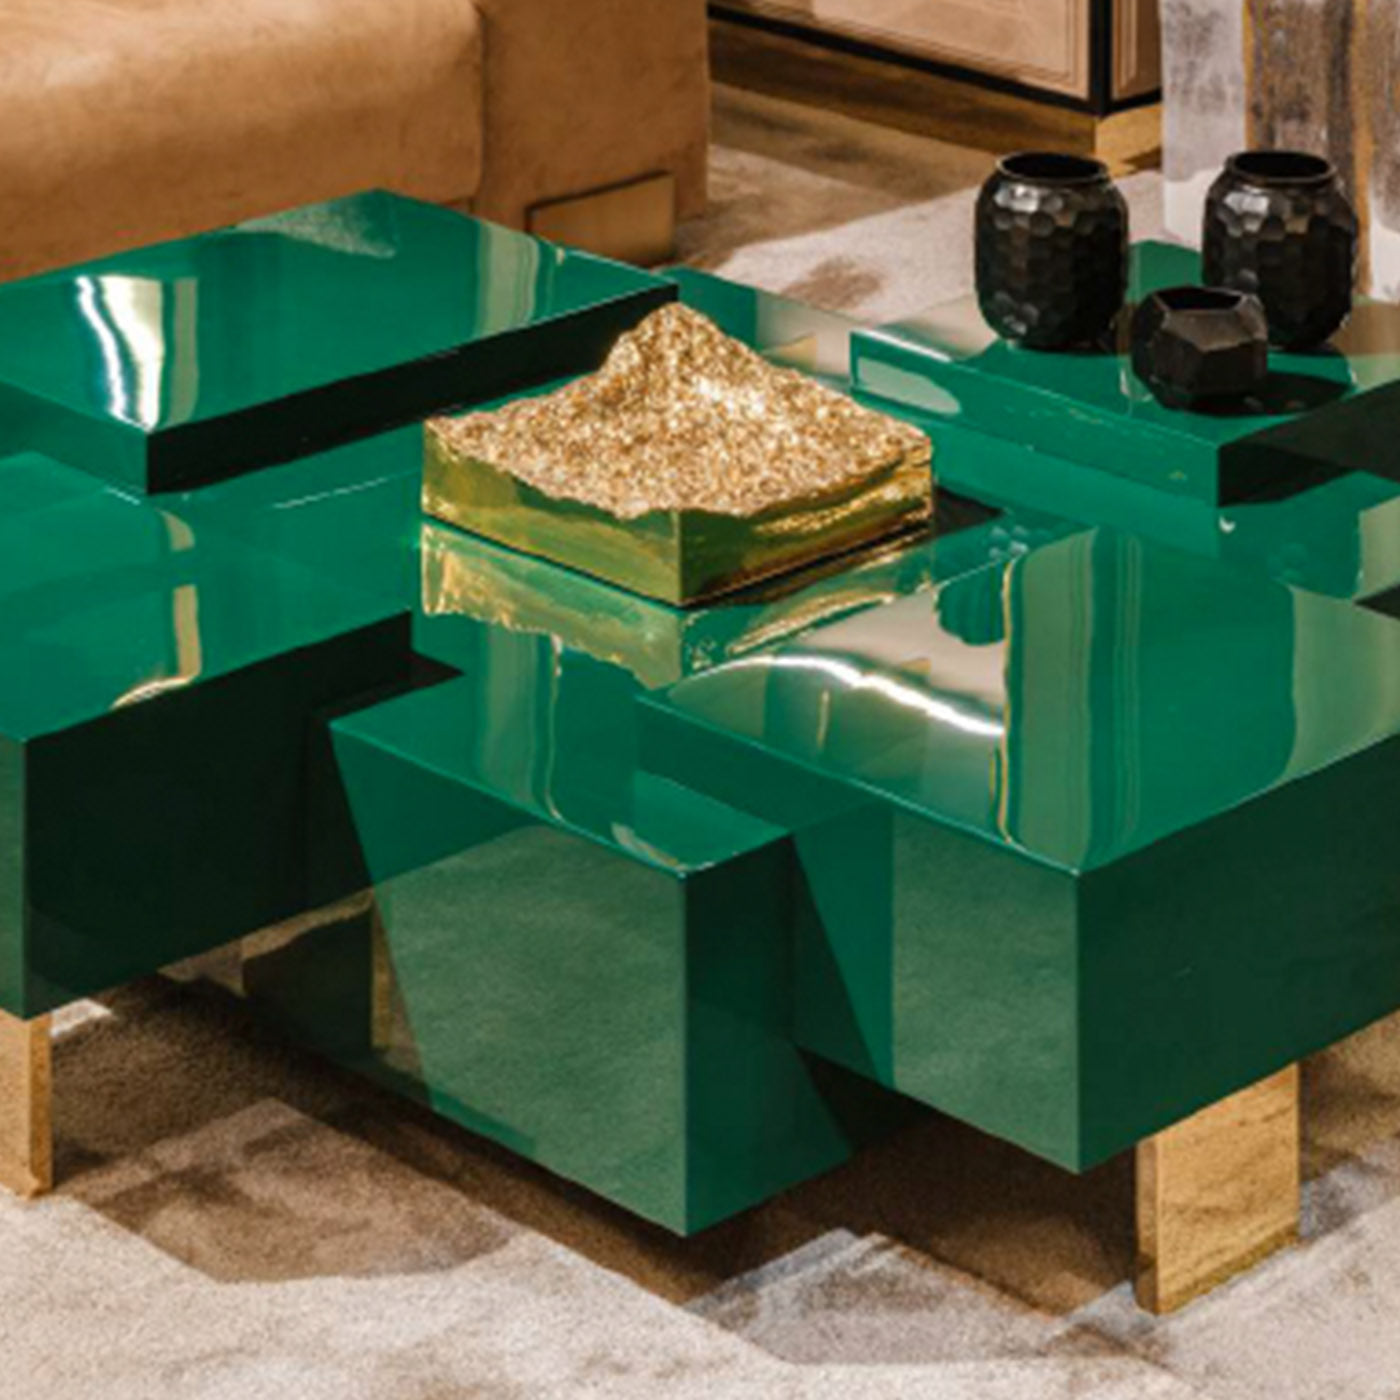 New Mark Coffee Table by Giannella Ventura - Alternative view 2